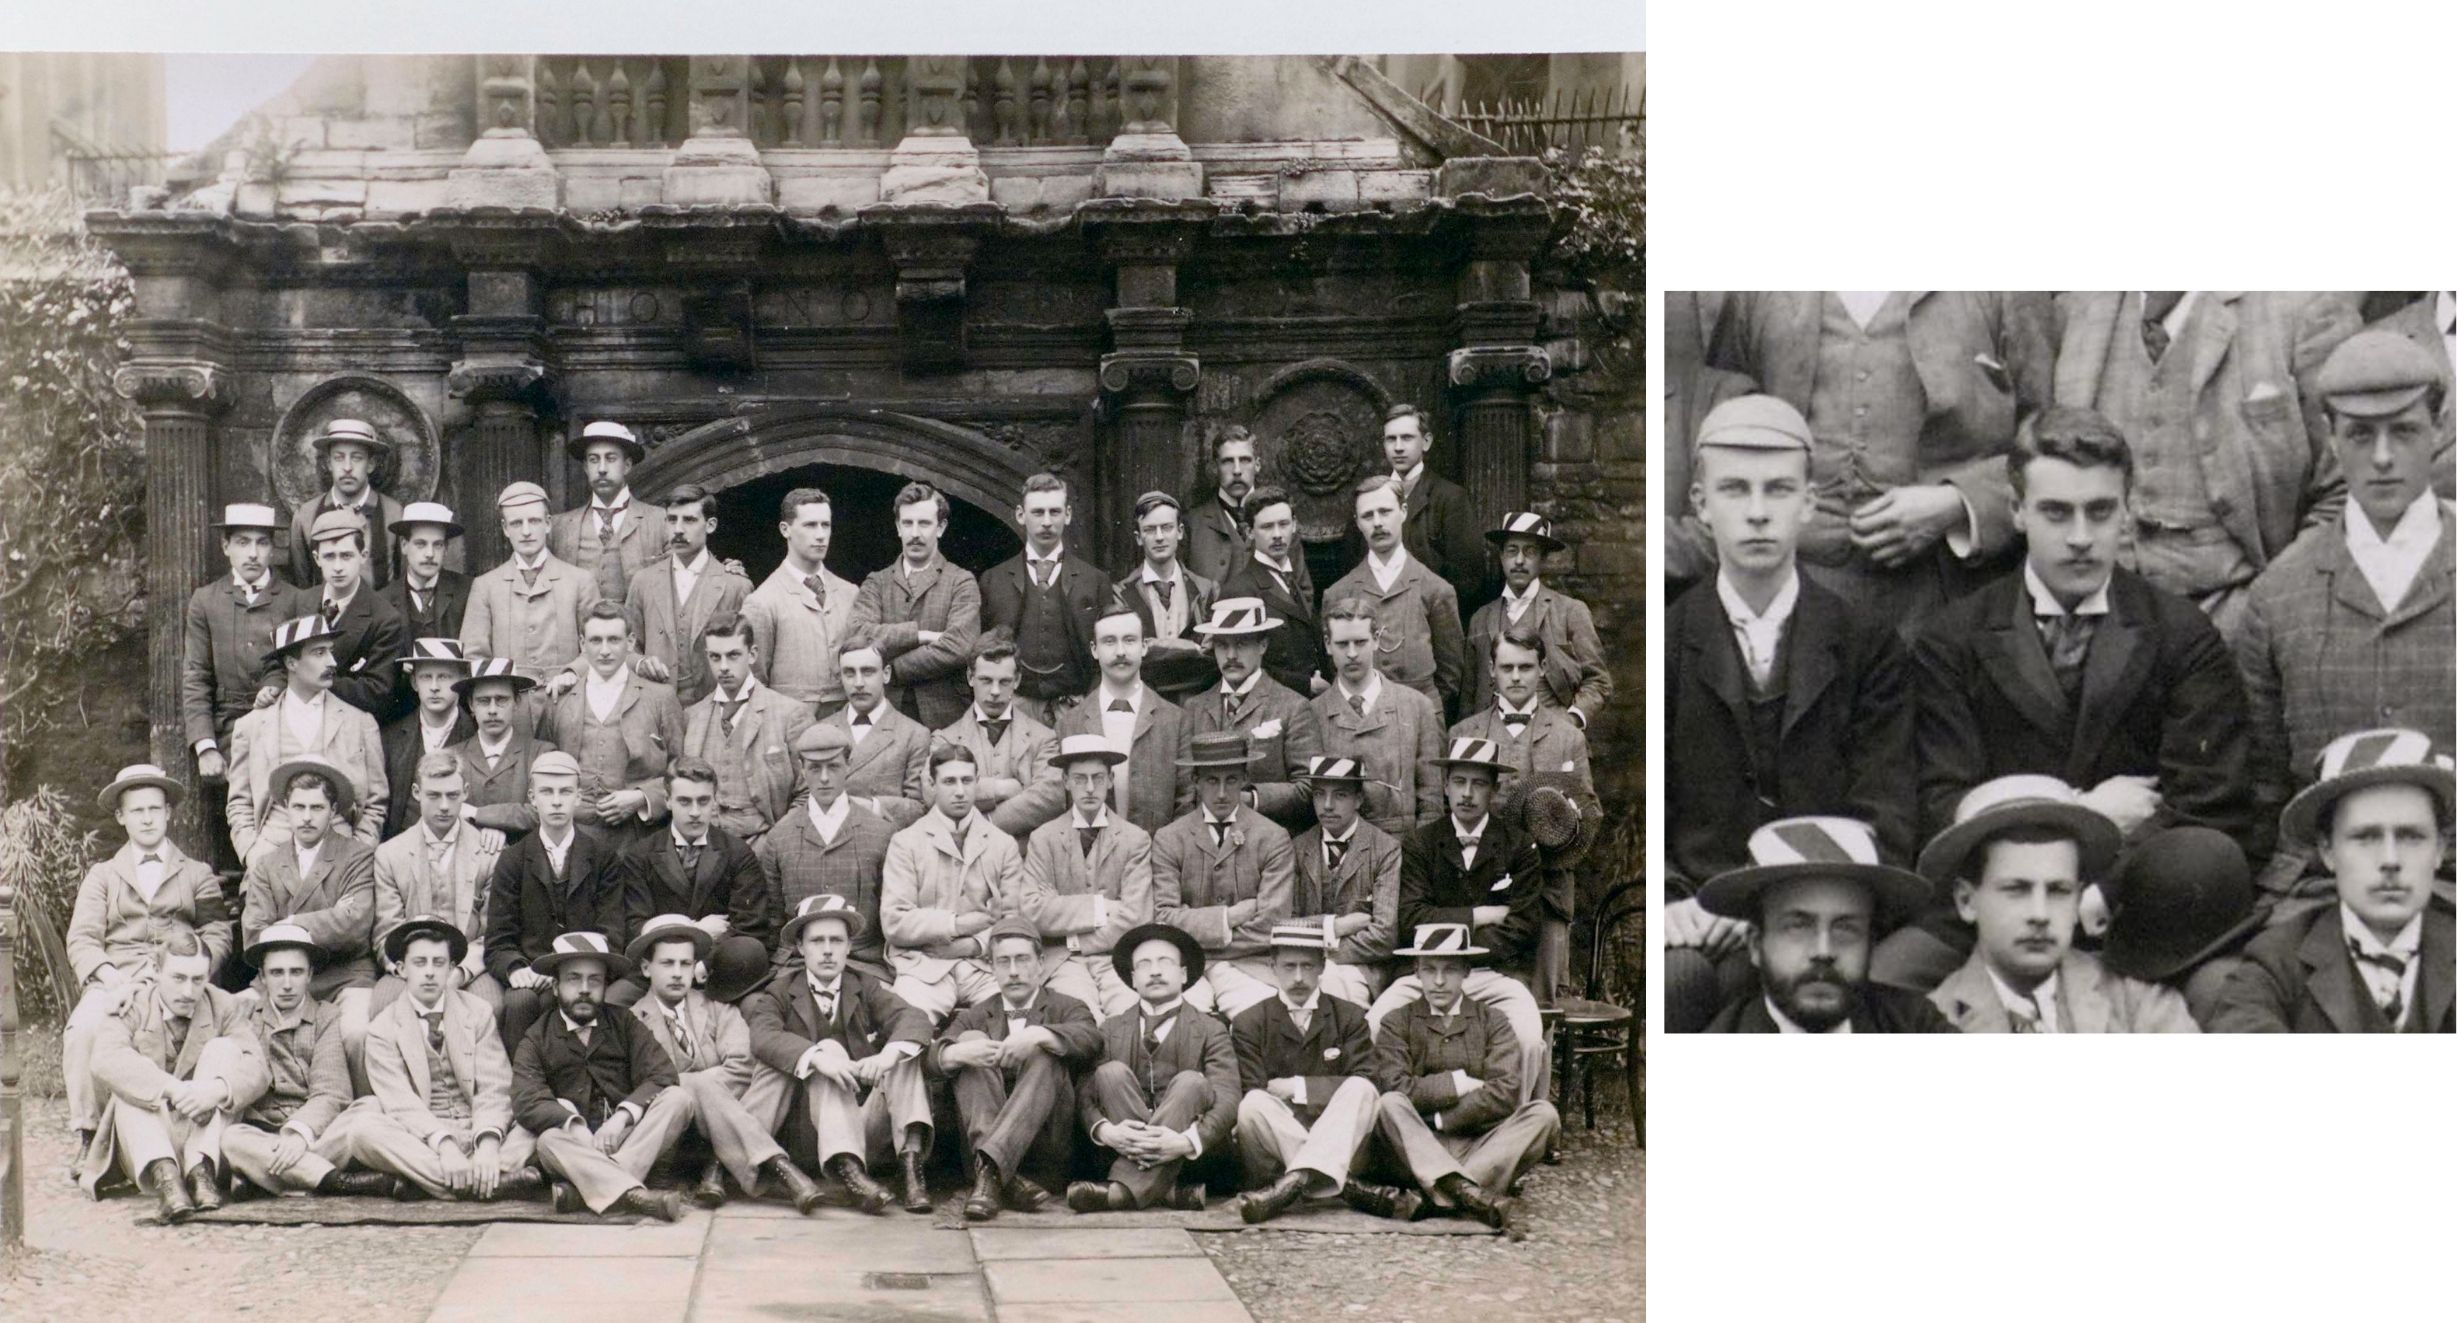 Five rows of men seated in front of the Gate of Honour, and a close up of one of the men